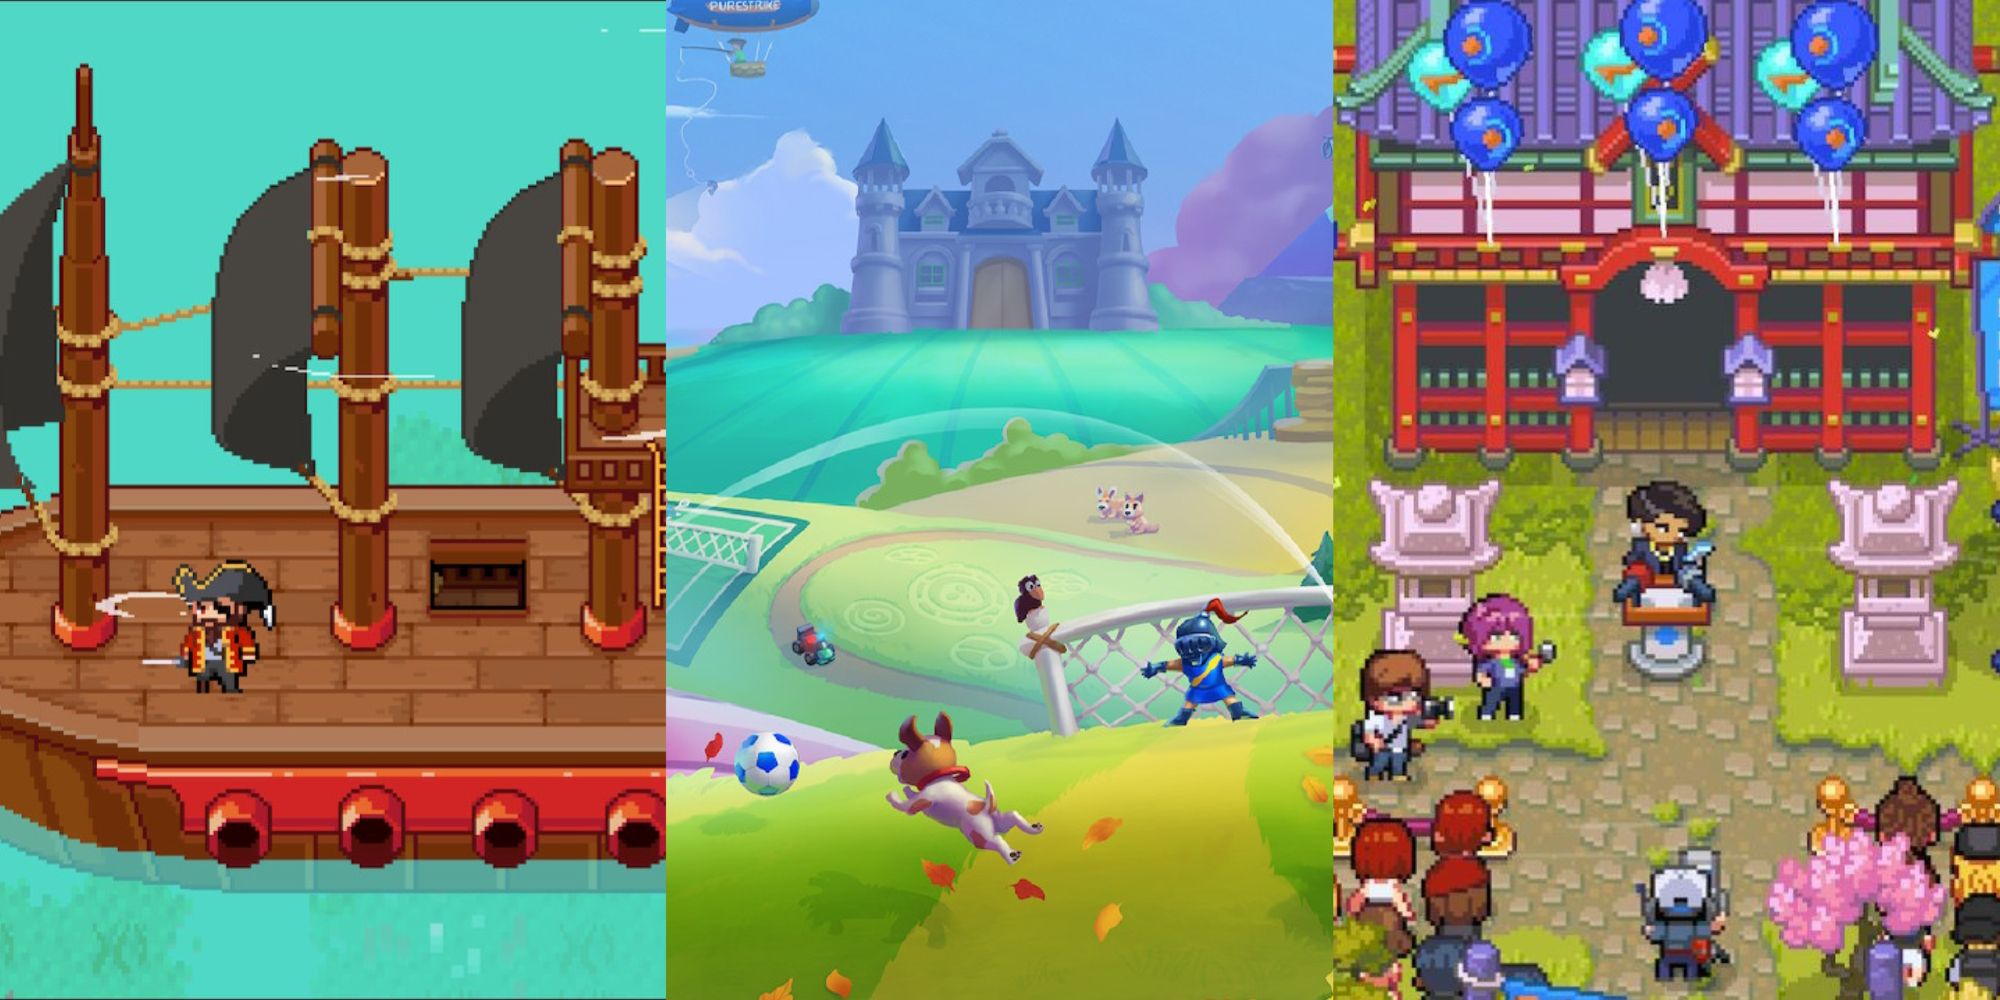 A collage of the pirates attacking, the loading screen, and the introduction of the island in Sports Story.